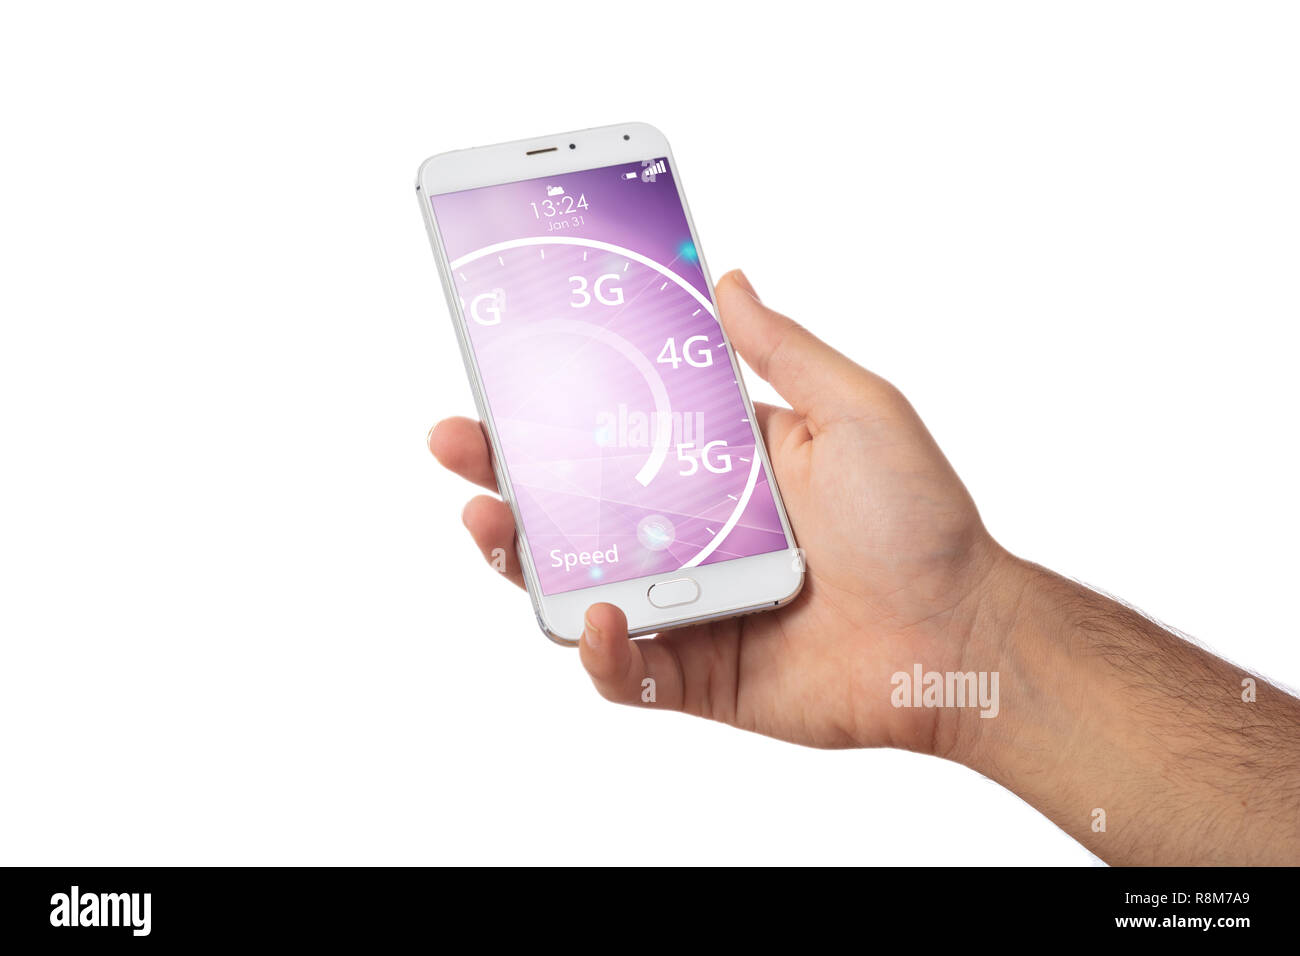 5G High speed network connection. Hand holding a smartphone isolated on white background. 5G internet speed on the screen Stock Photo